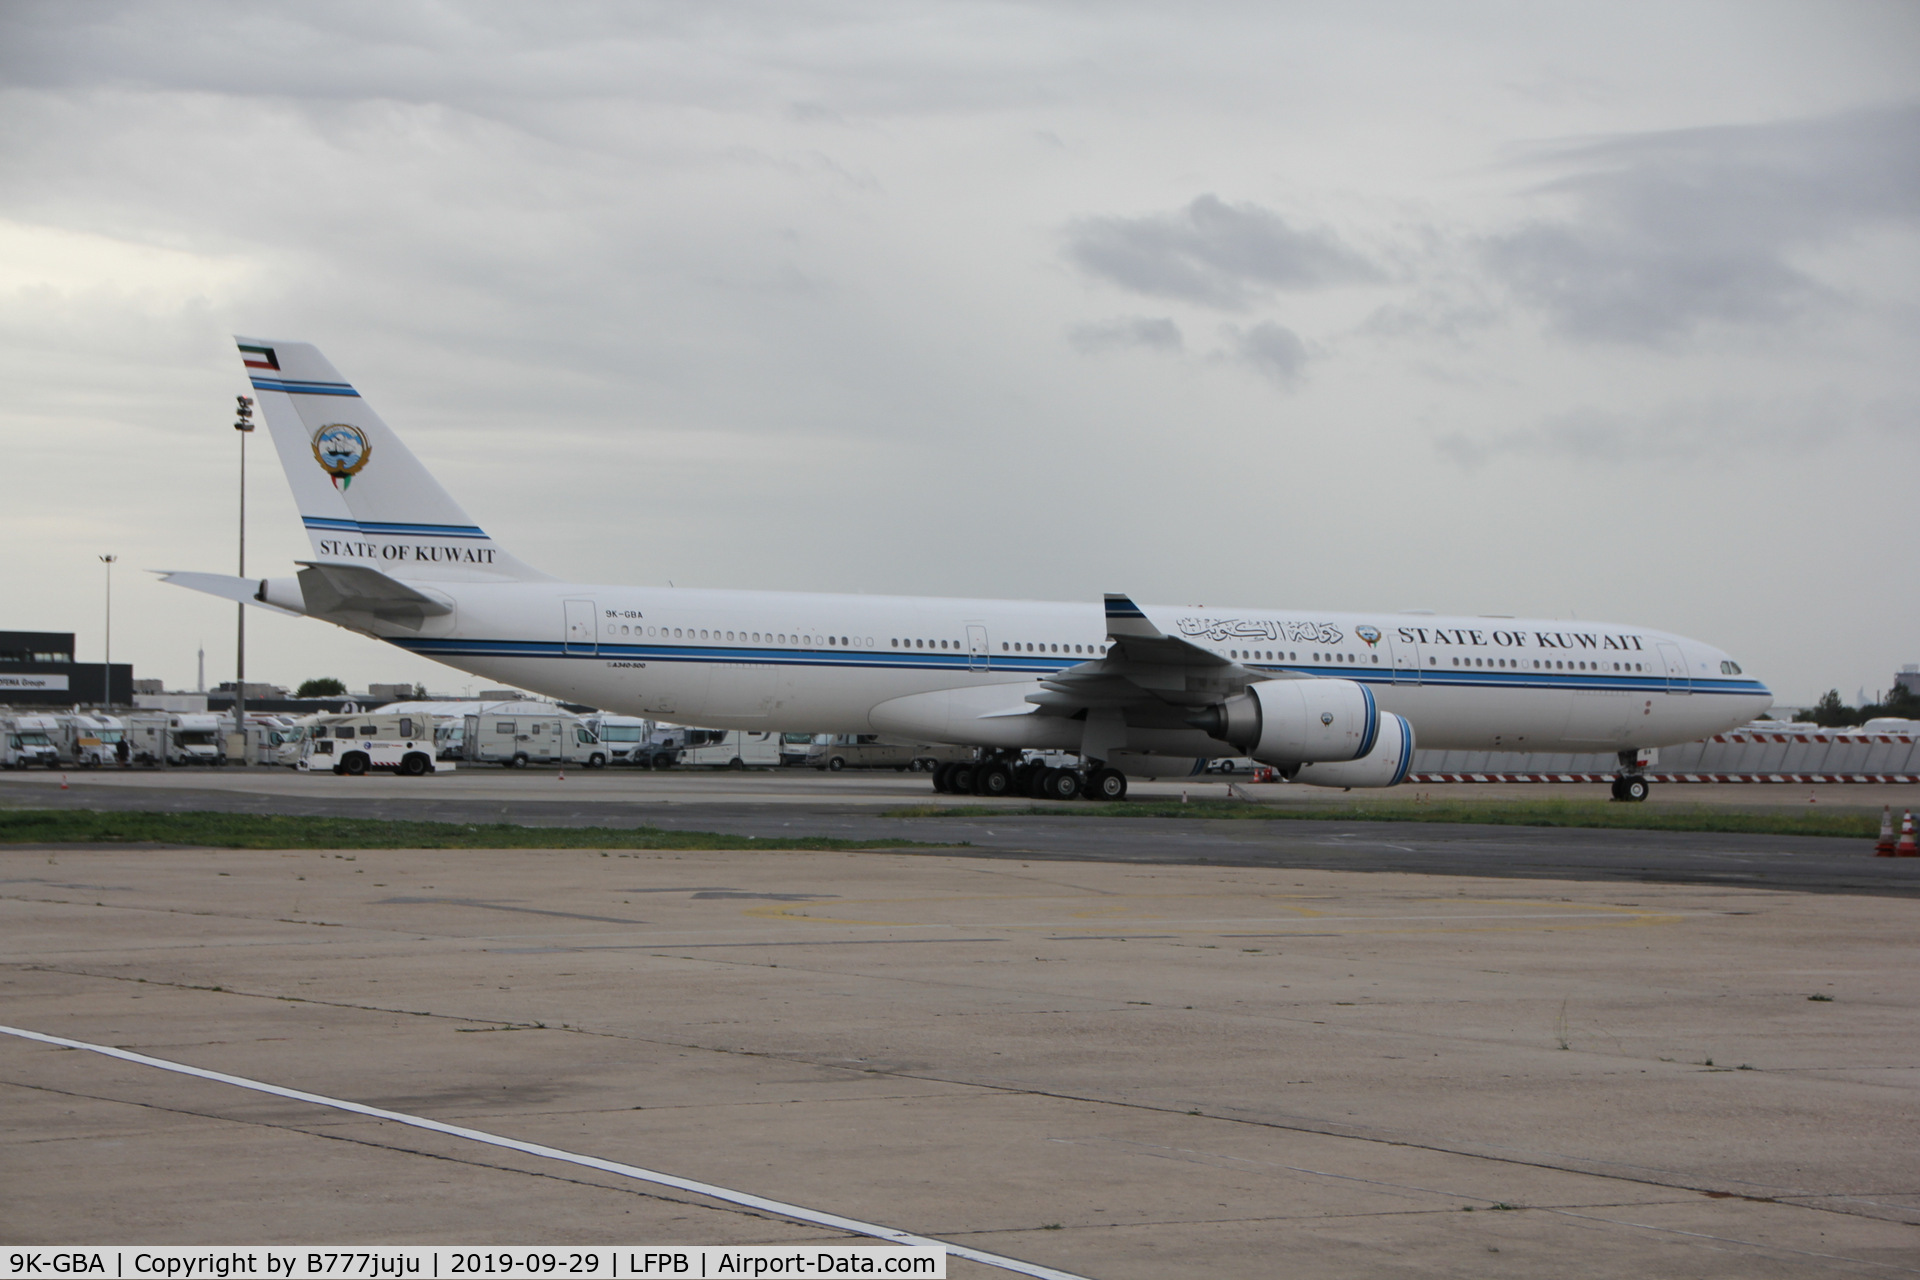 9K-GBA, 2009 Airbus A340-542 C/N 1091, at Le Bourget